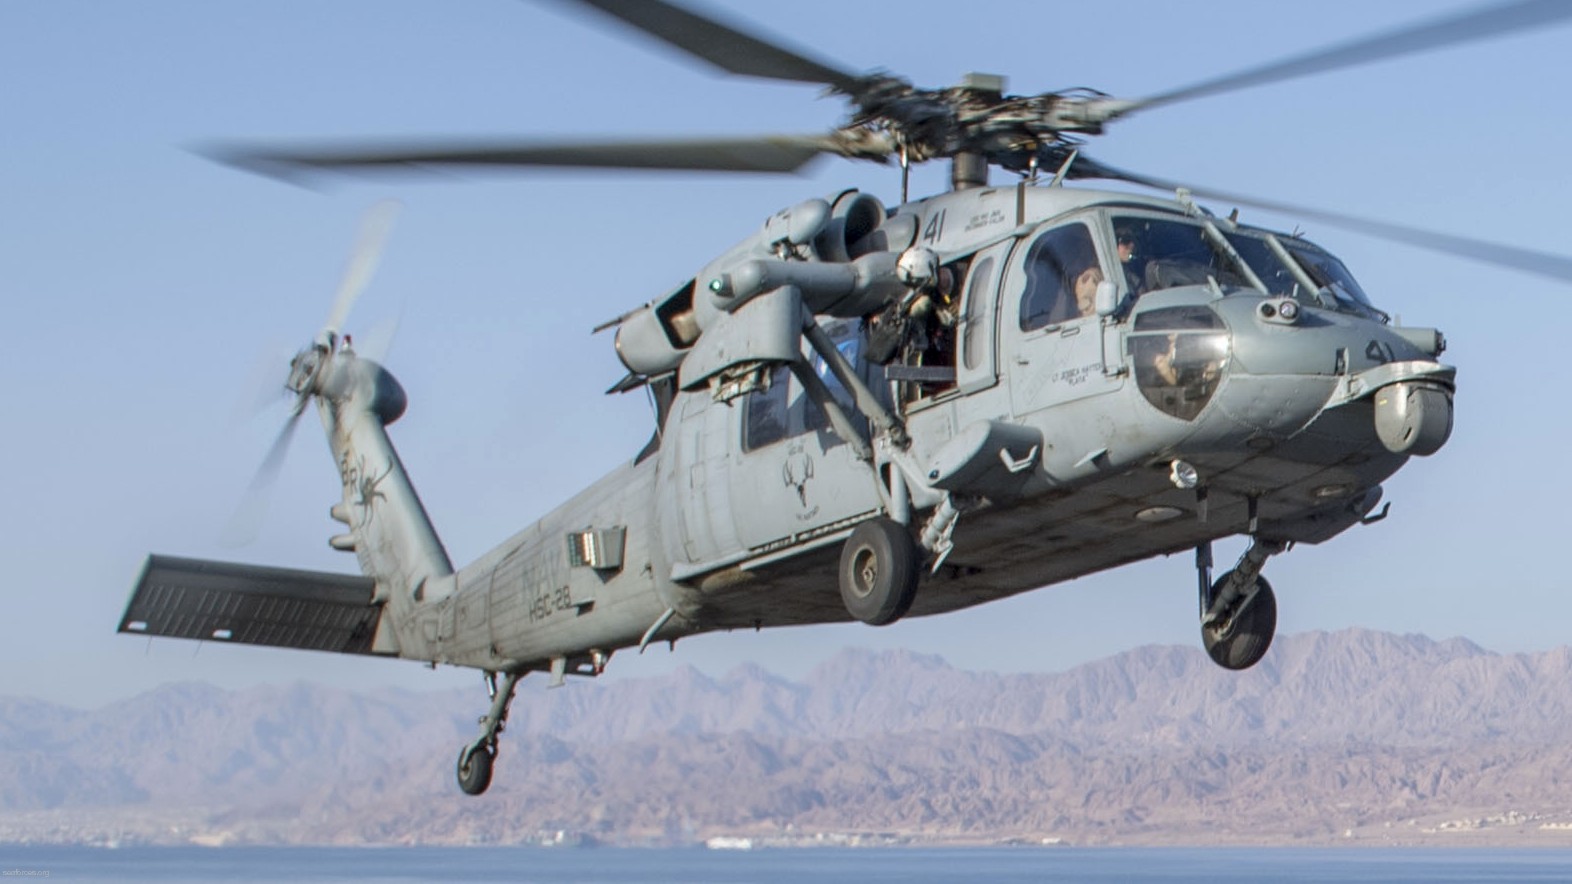 hsc-28 dragon whales helicopter sea combat squadron mh-60s seahawk us navy 36 5th fleet aor